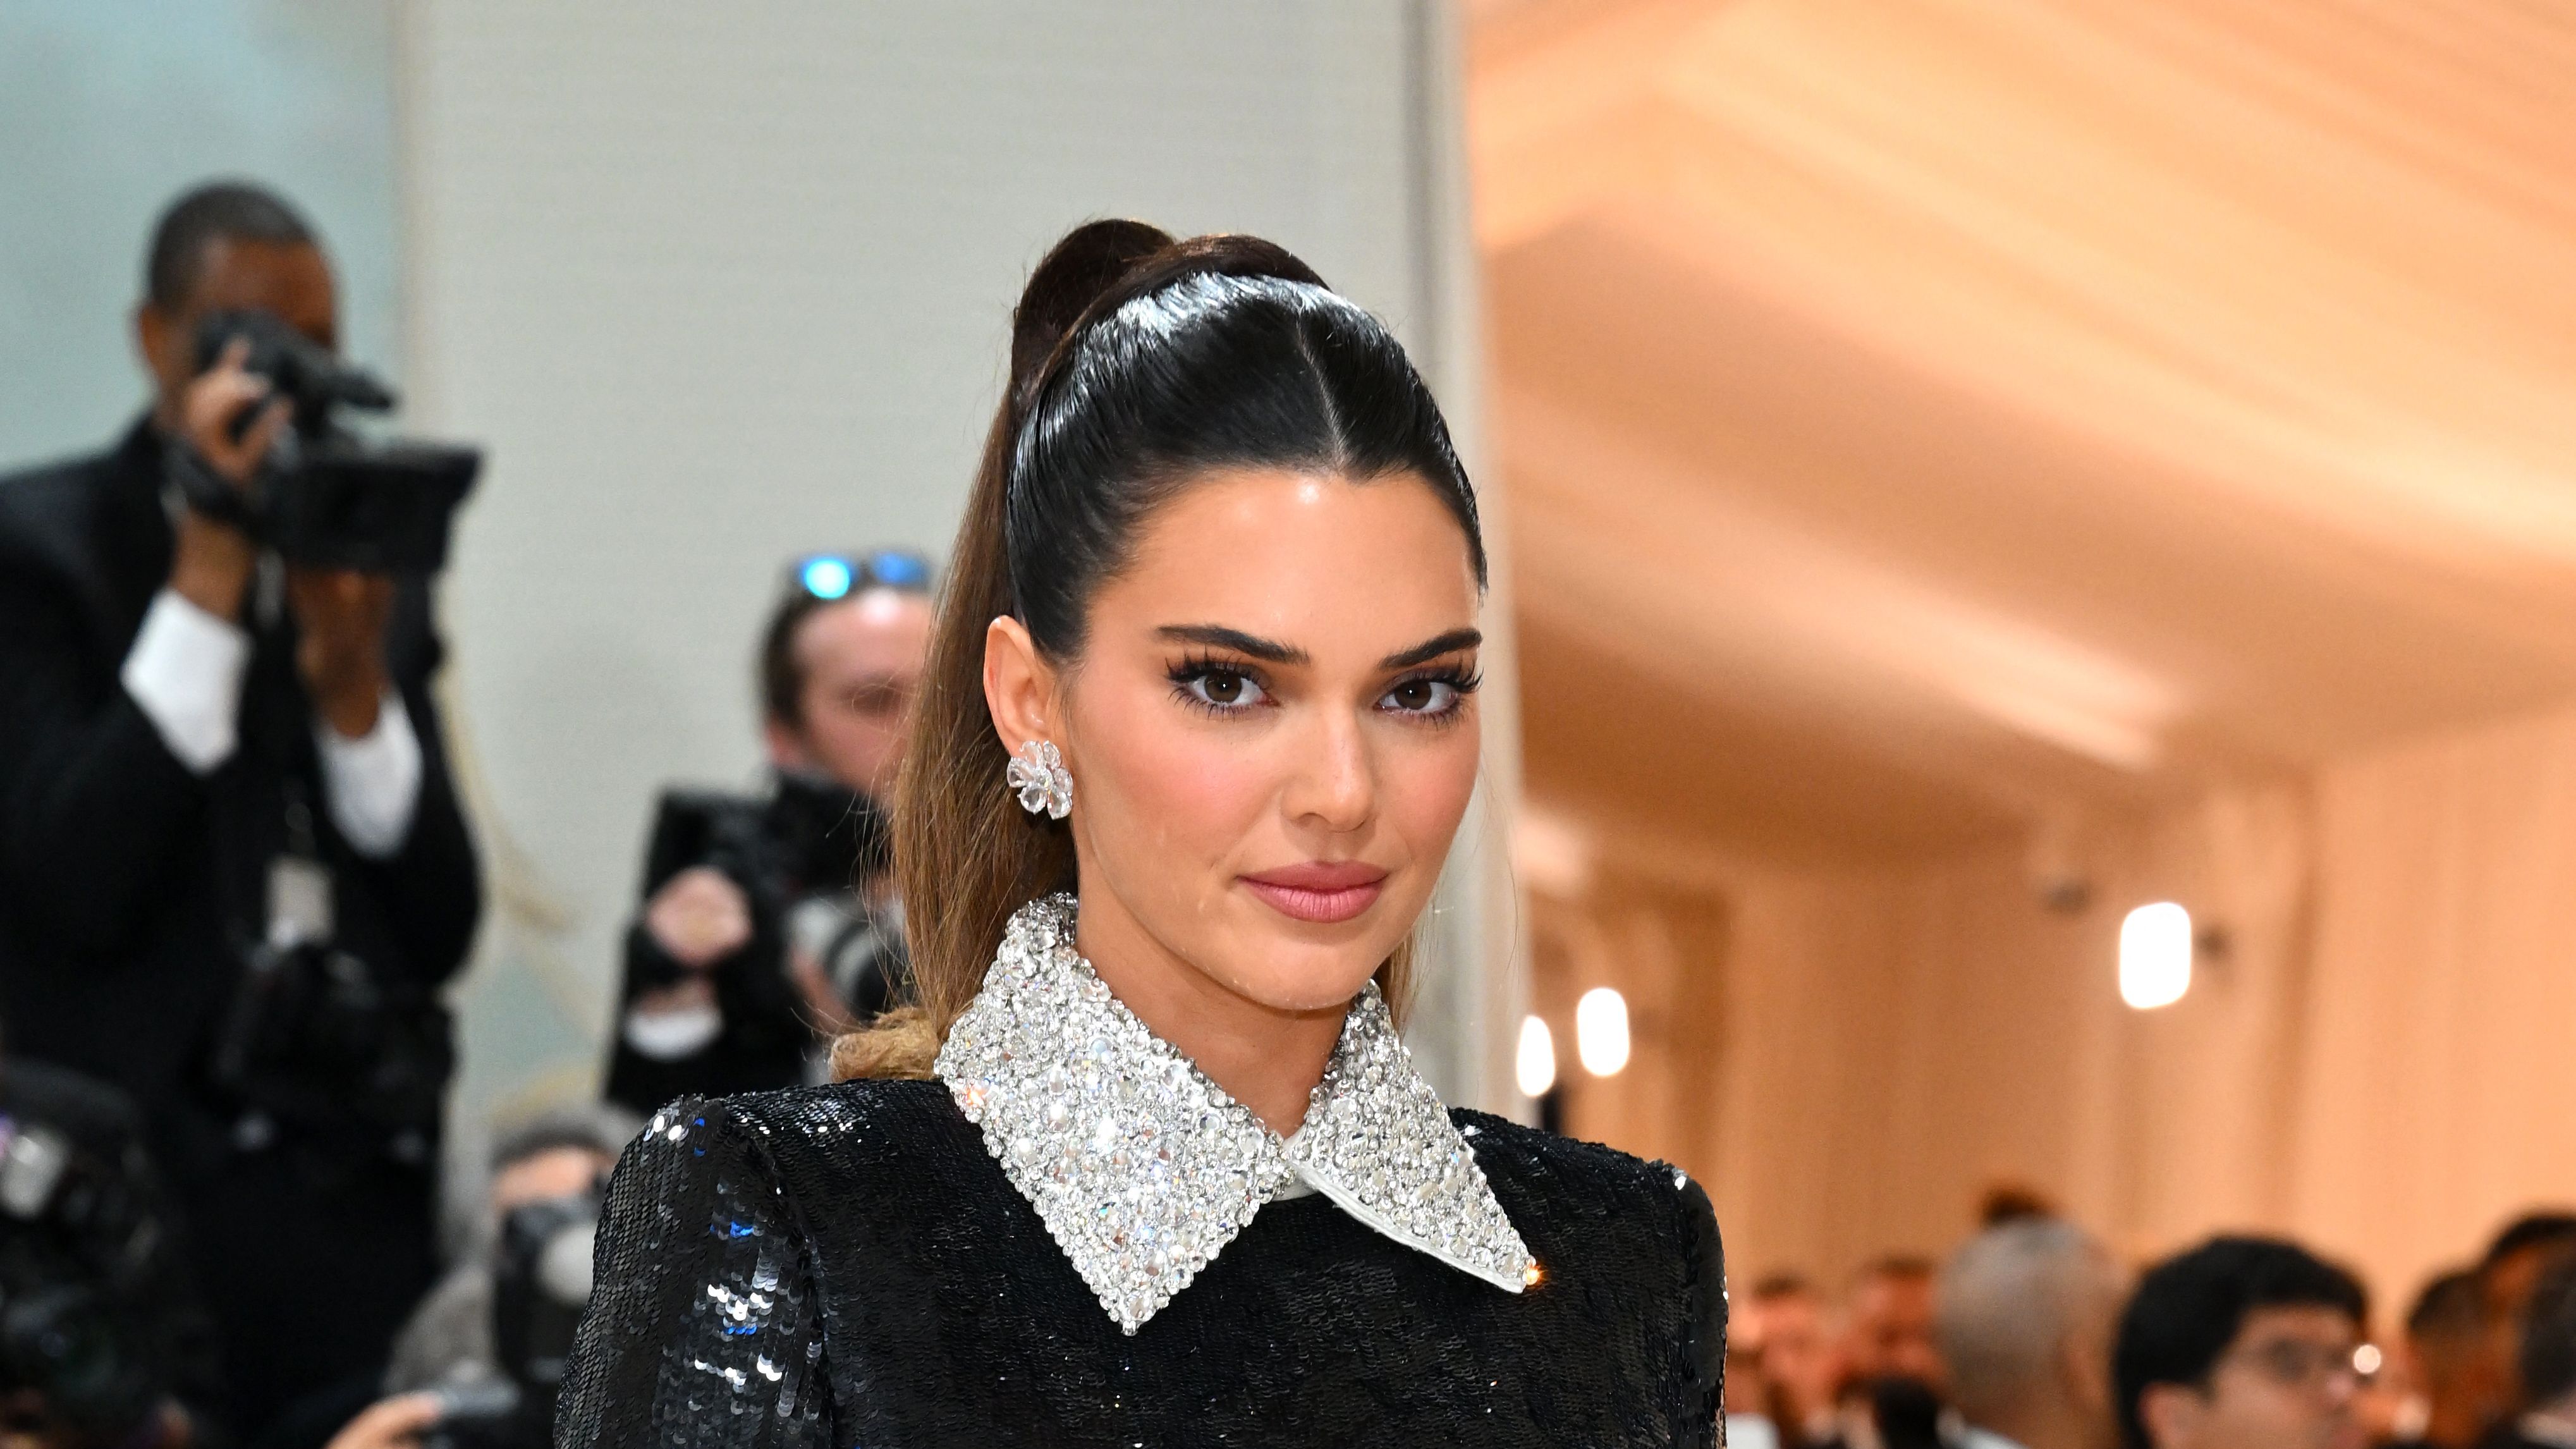 https://hips.hearstapps.com/hmg-prod/images/model-kendall-jenner-arrives-for-the-2023-met-gala-at-the-news-photo-1695222564.jpg?crop=1xw:0.37497xh;center,top